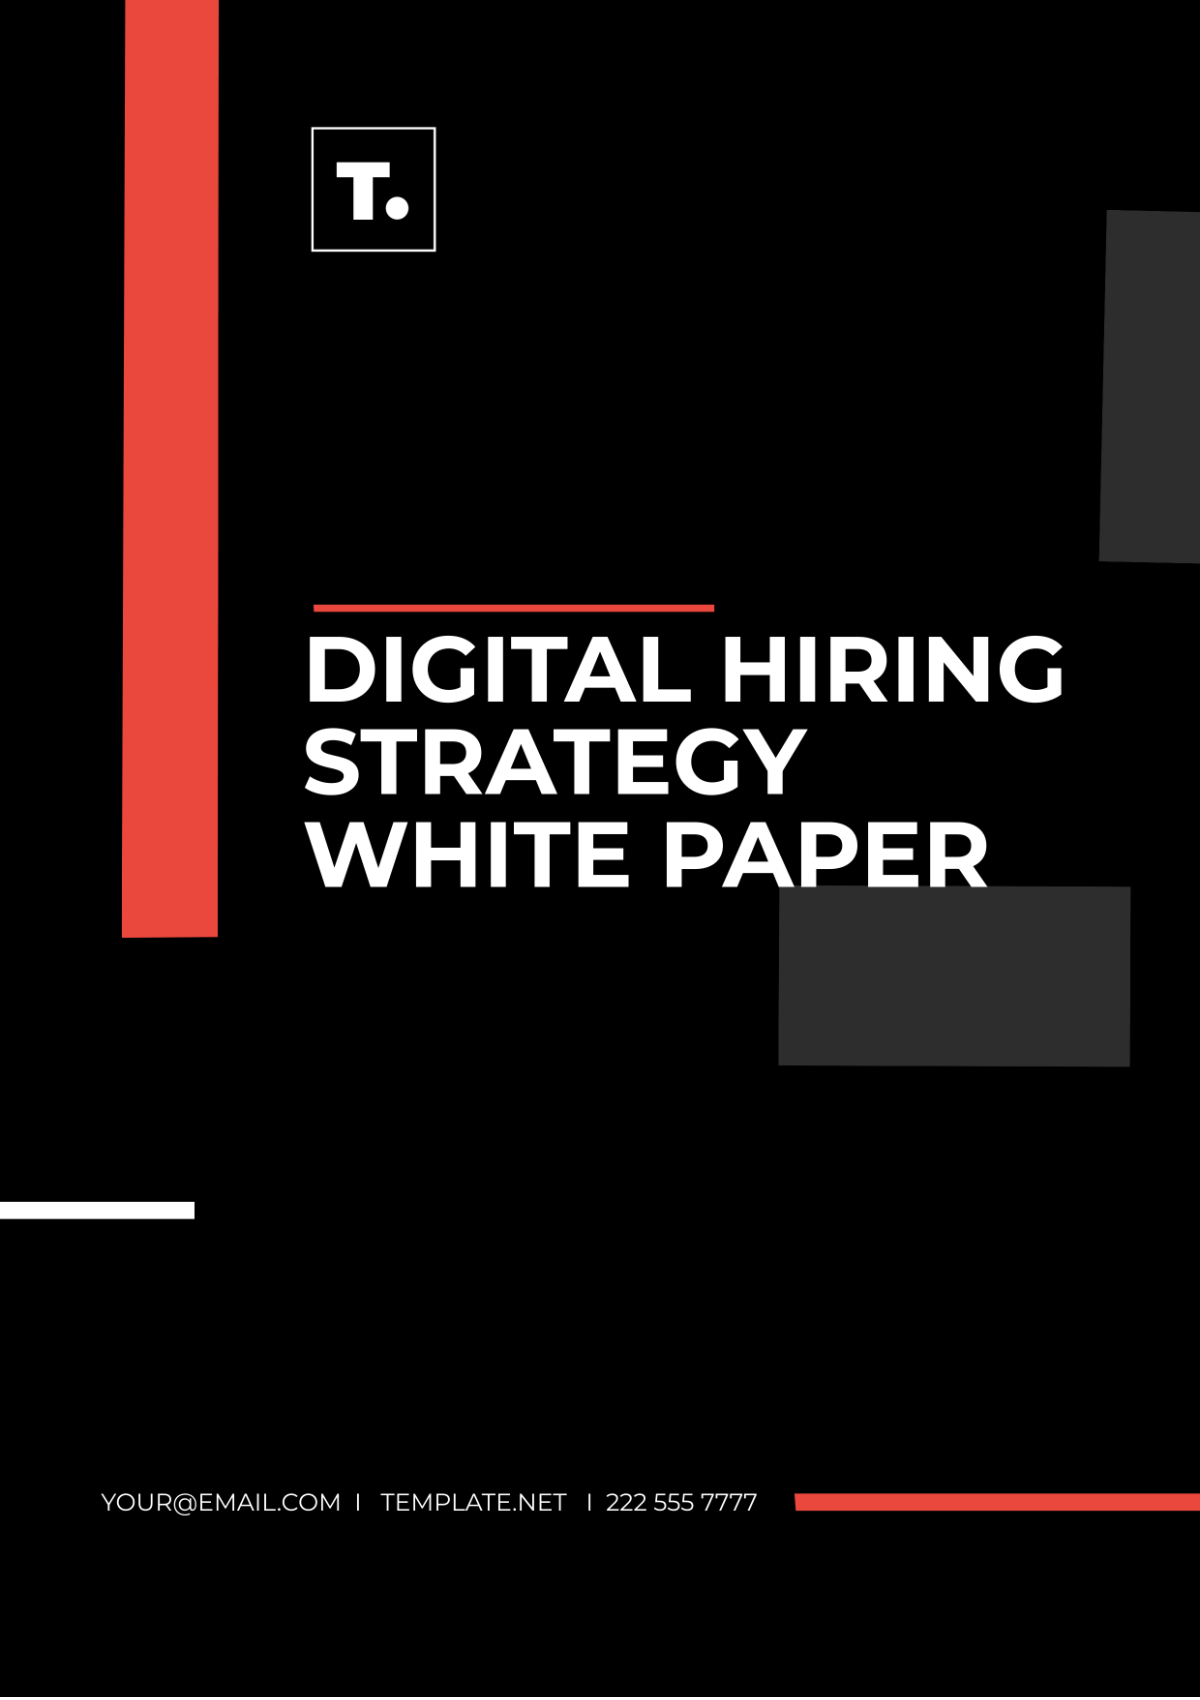 Digital Hiring Strategy White Paper Template